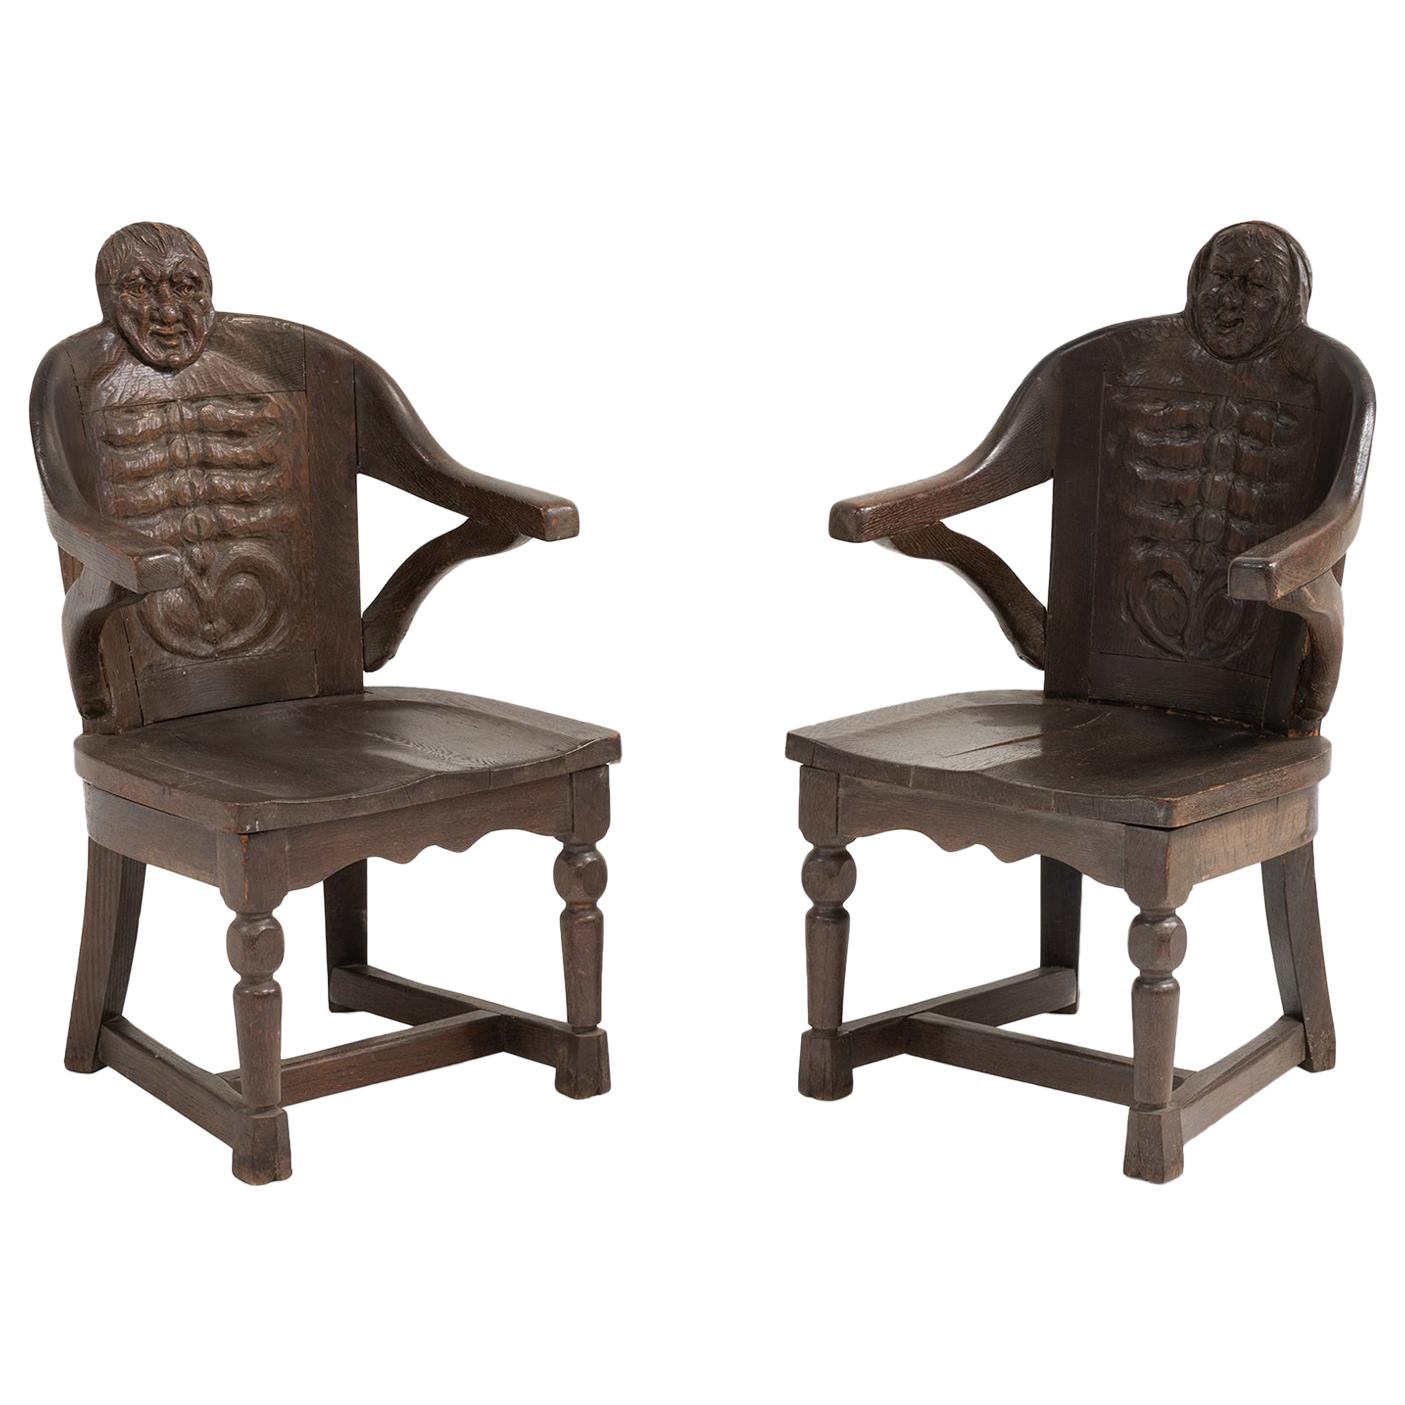 Anthropomorphism Chairs by J.B. Vansciver Co